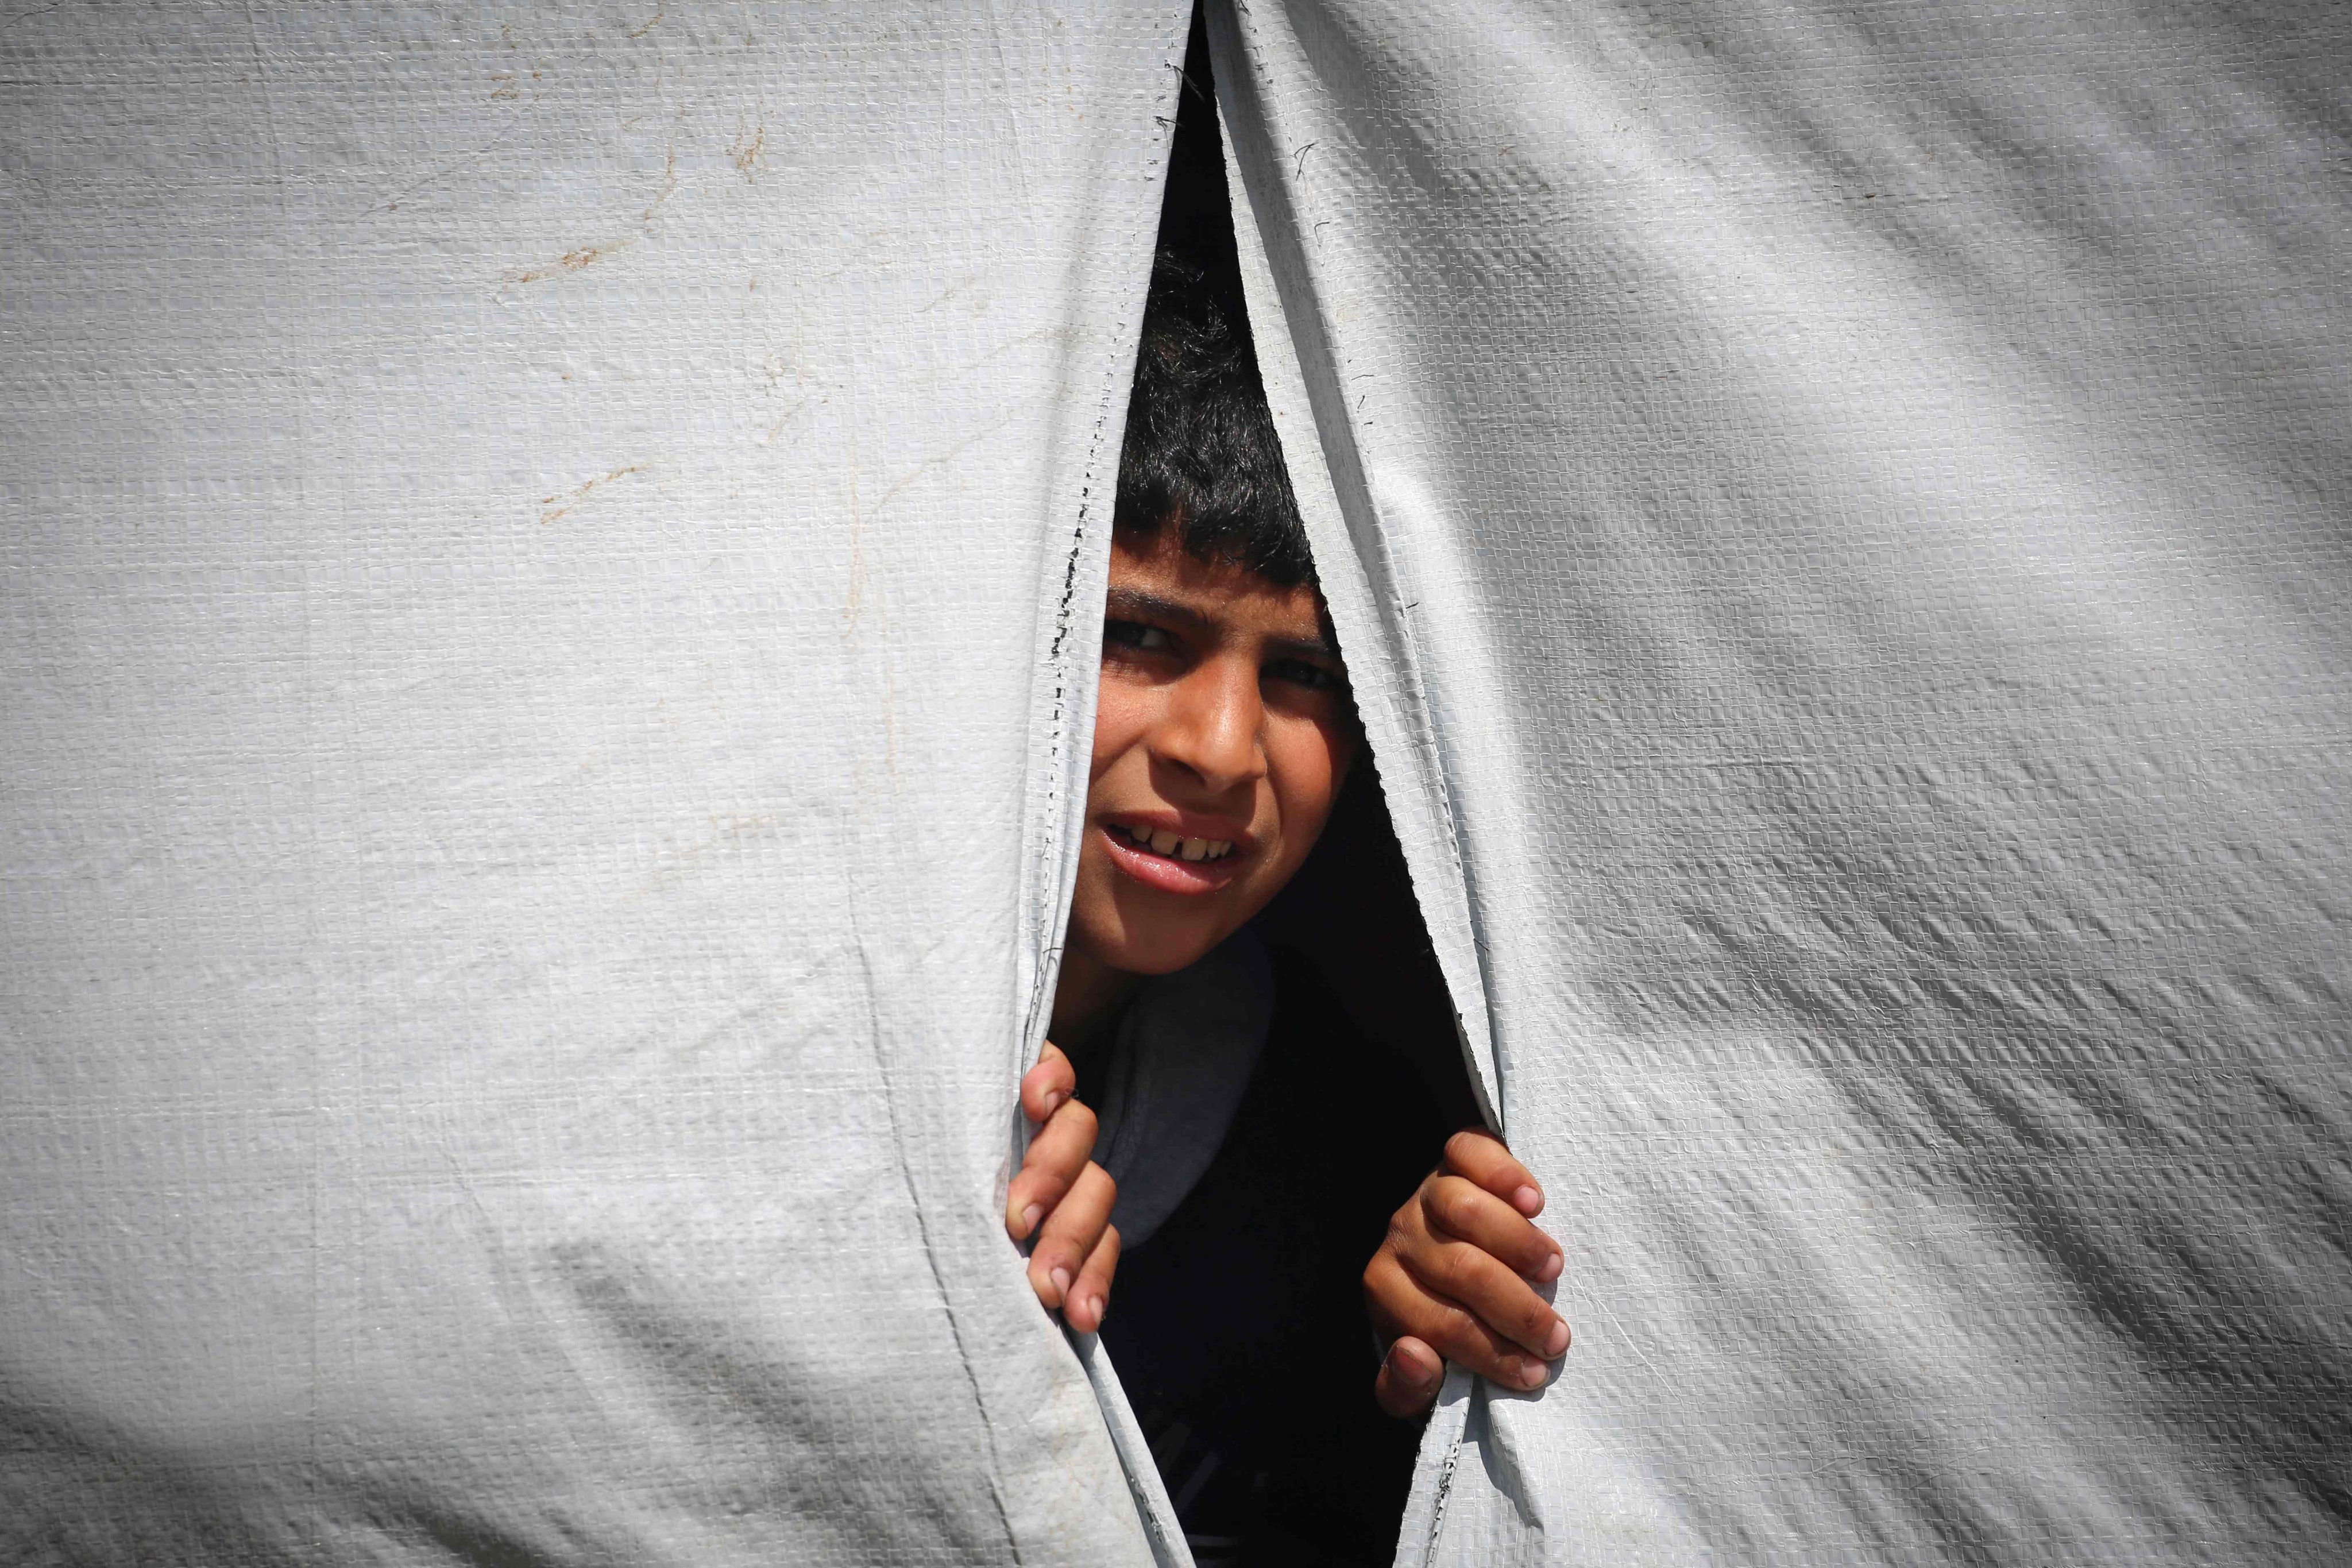 A displaced Palestinian boy looks out of a tent in Rafah in the southern Gaza Strip as people prepare to leave following an evacuation order by the Israeli army on Monday. Photo: AFP